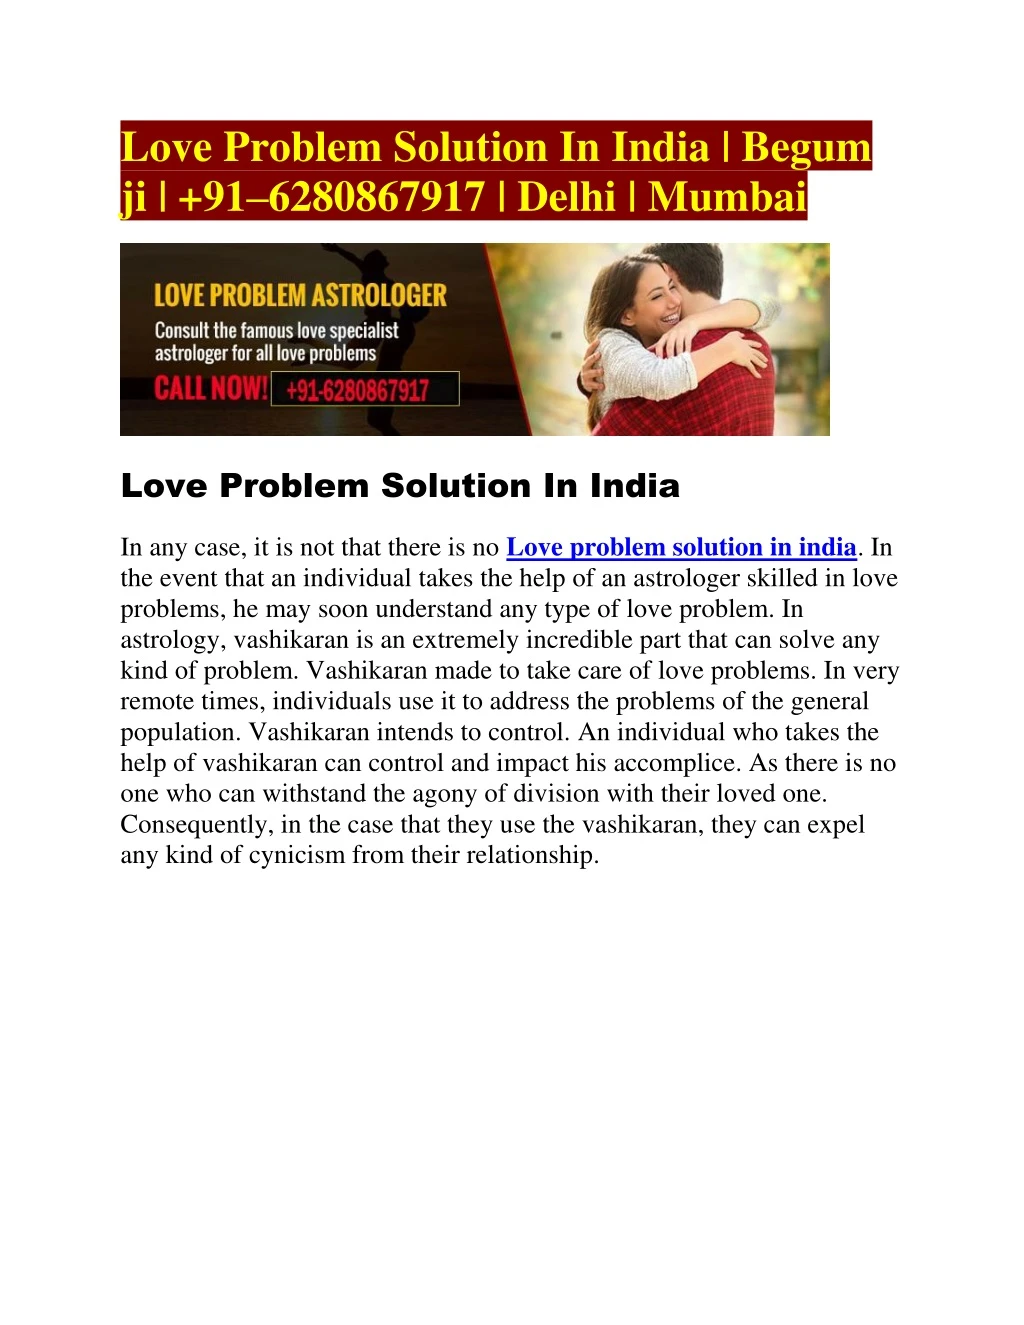 love problem solution in india begum